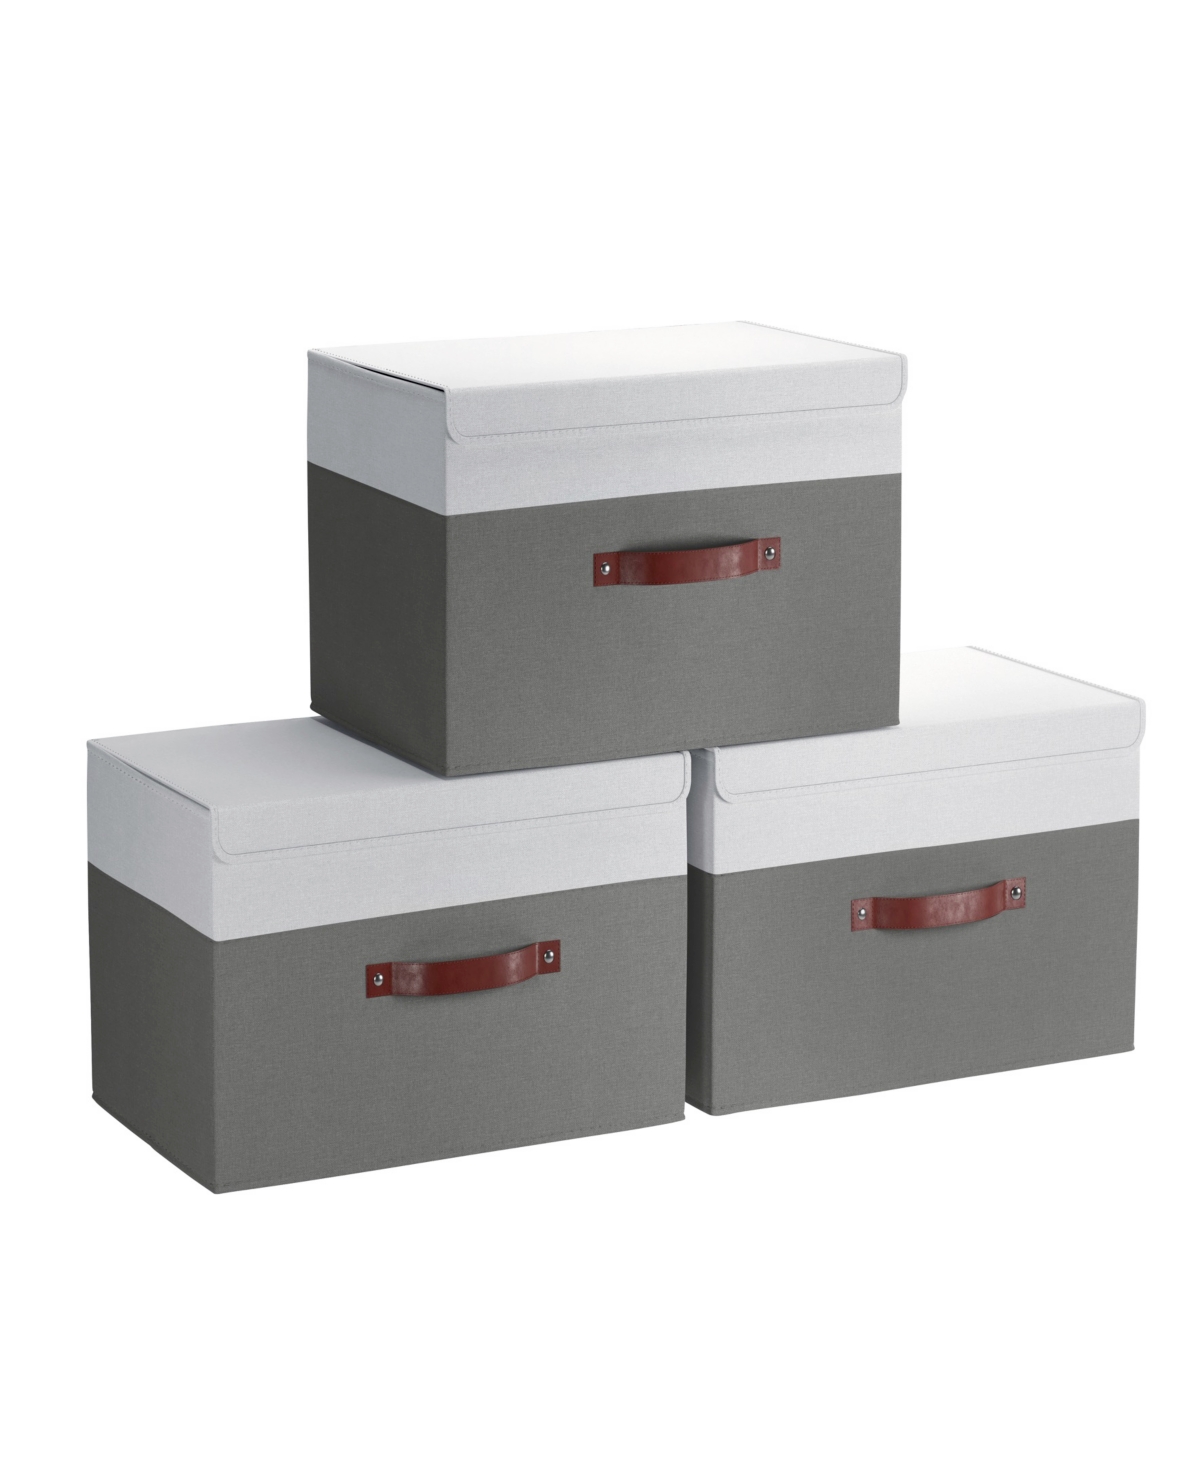 Foldable Linen XLarge Storage Bin with Leather Handles and Lid - Set of 3 - Gray